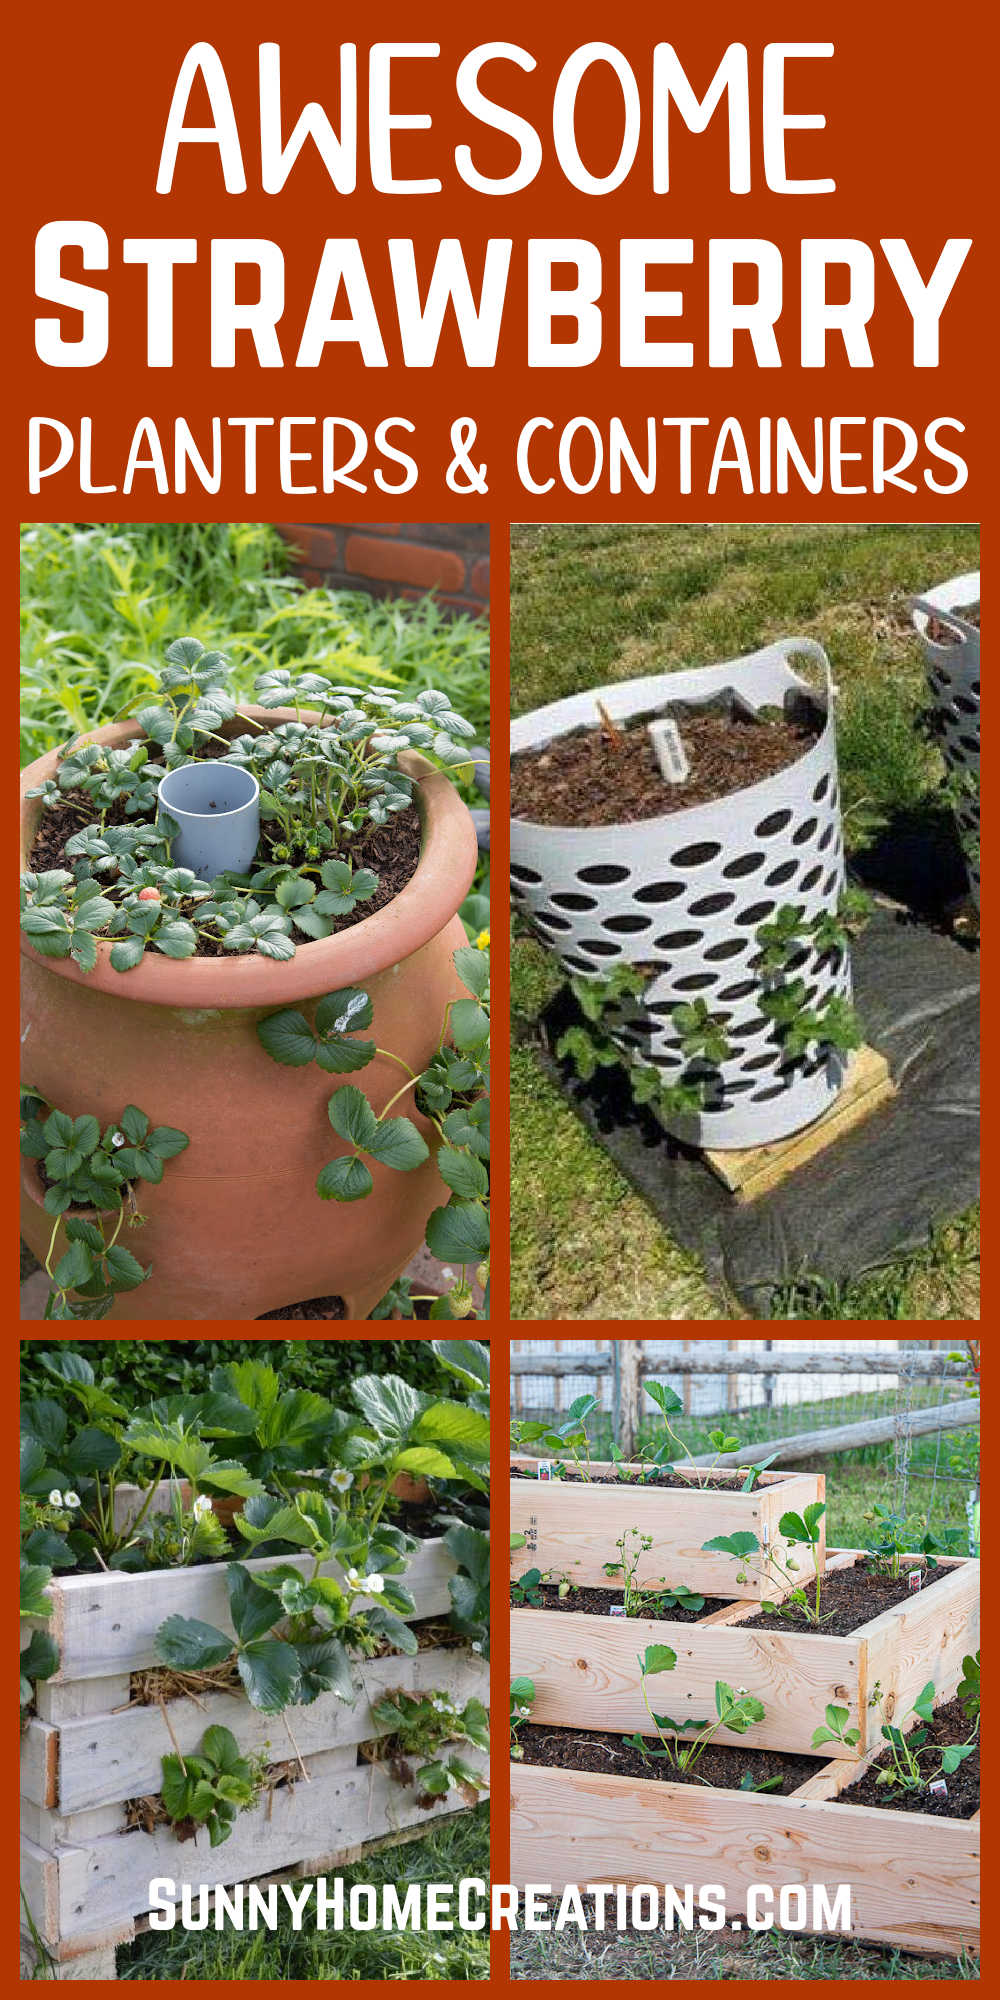 Pin image: Top says "Awesome strawberry planters and containers" and bottom is a collage of 4 planters.